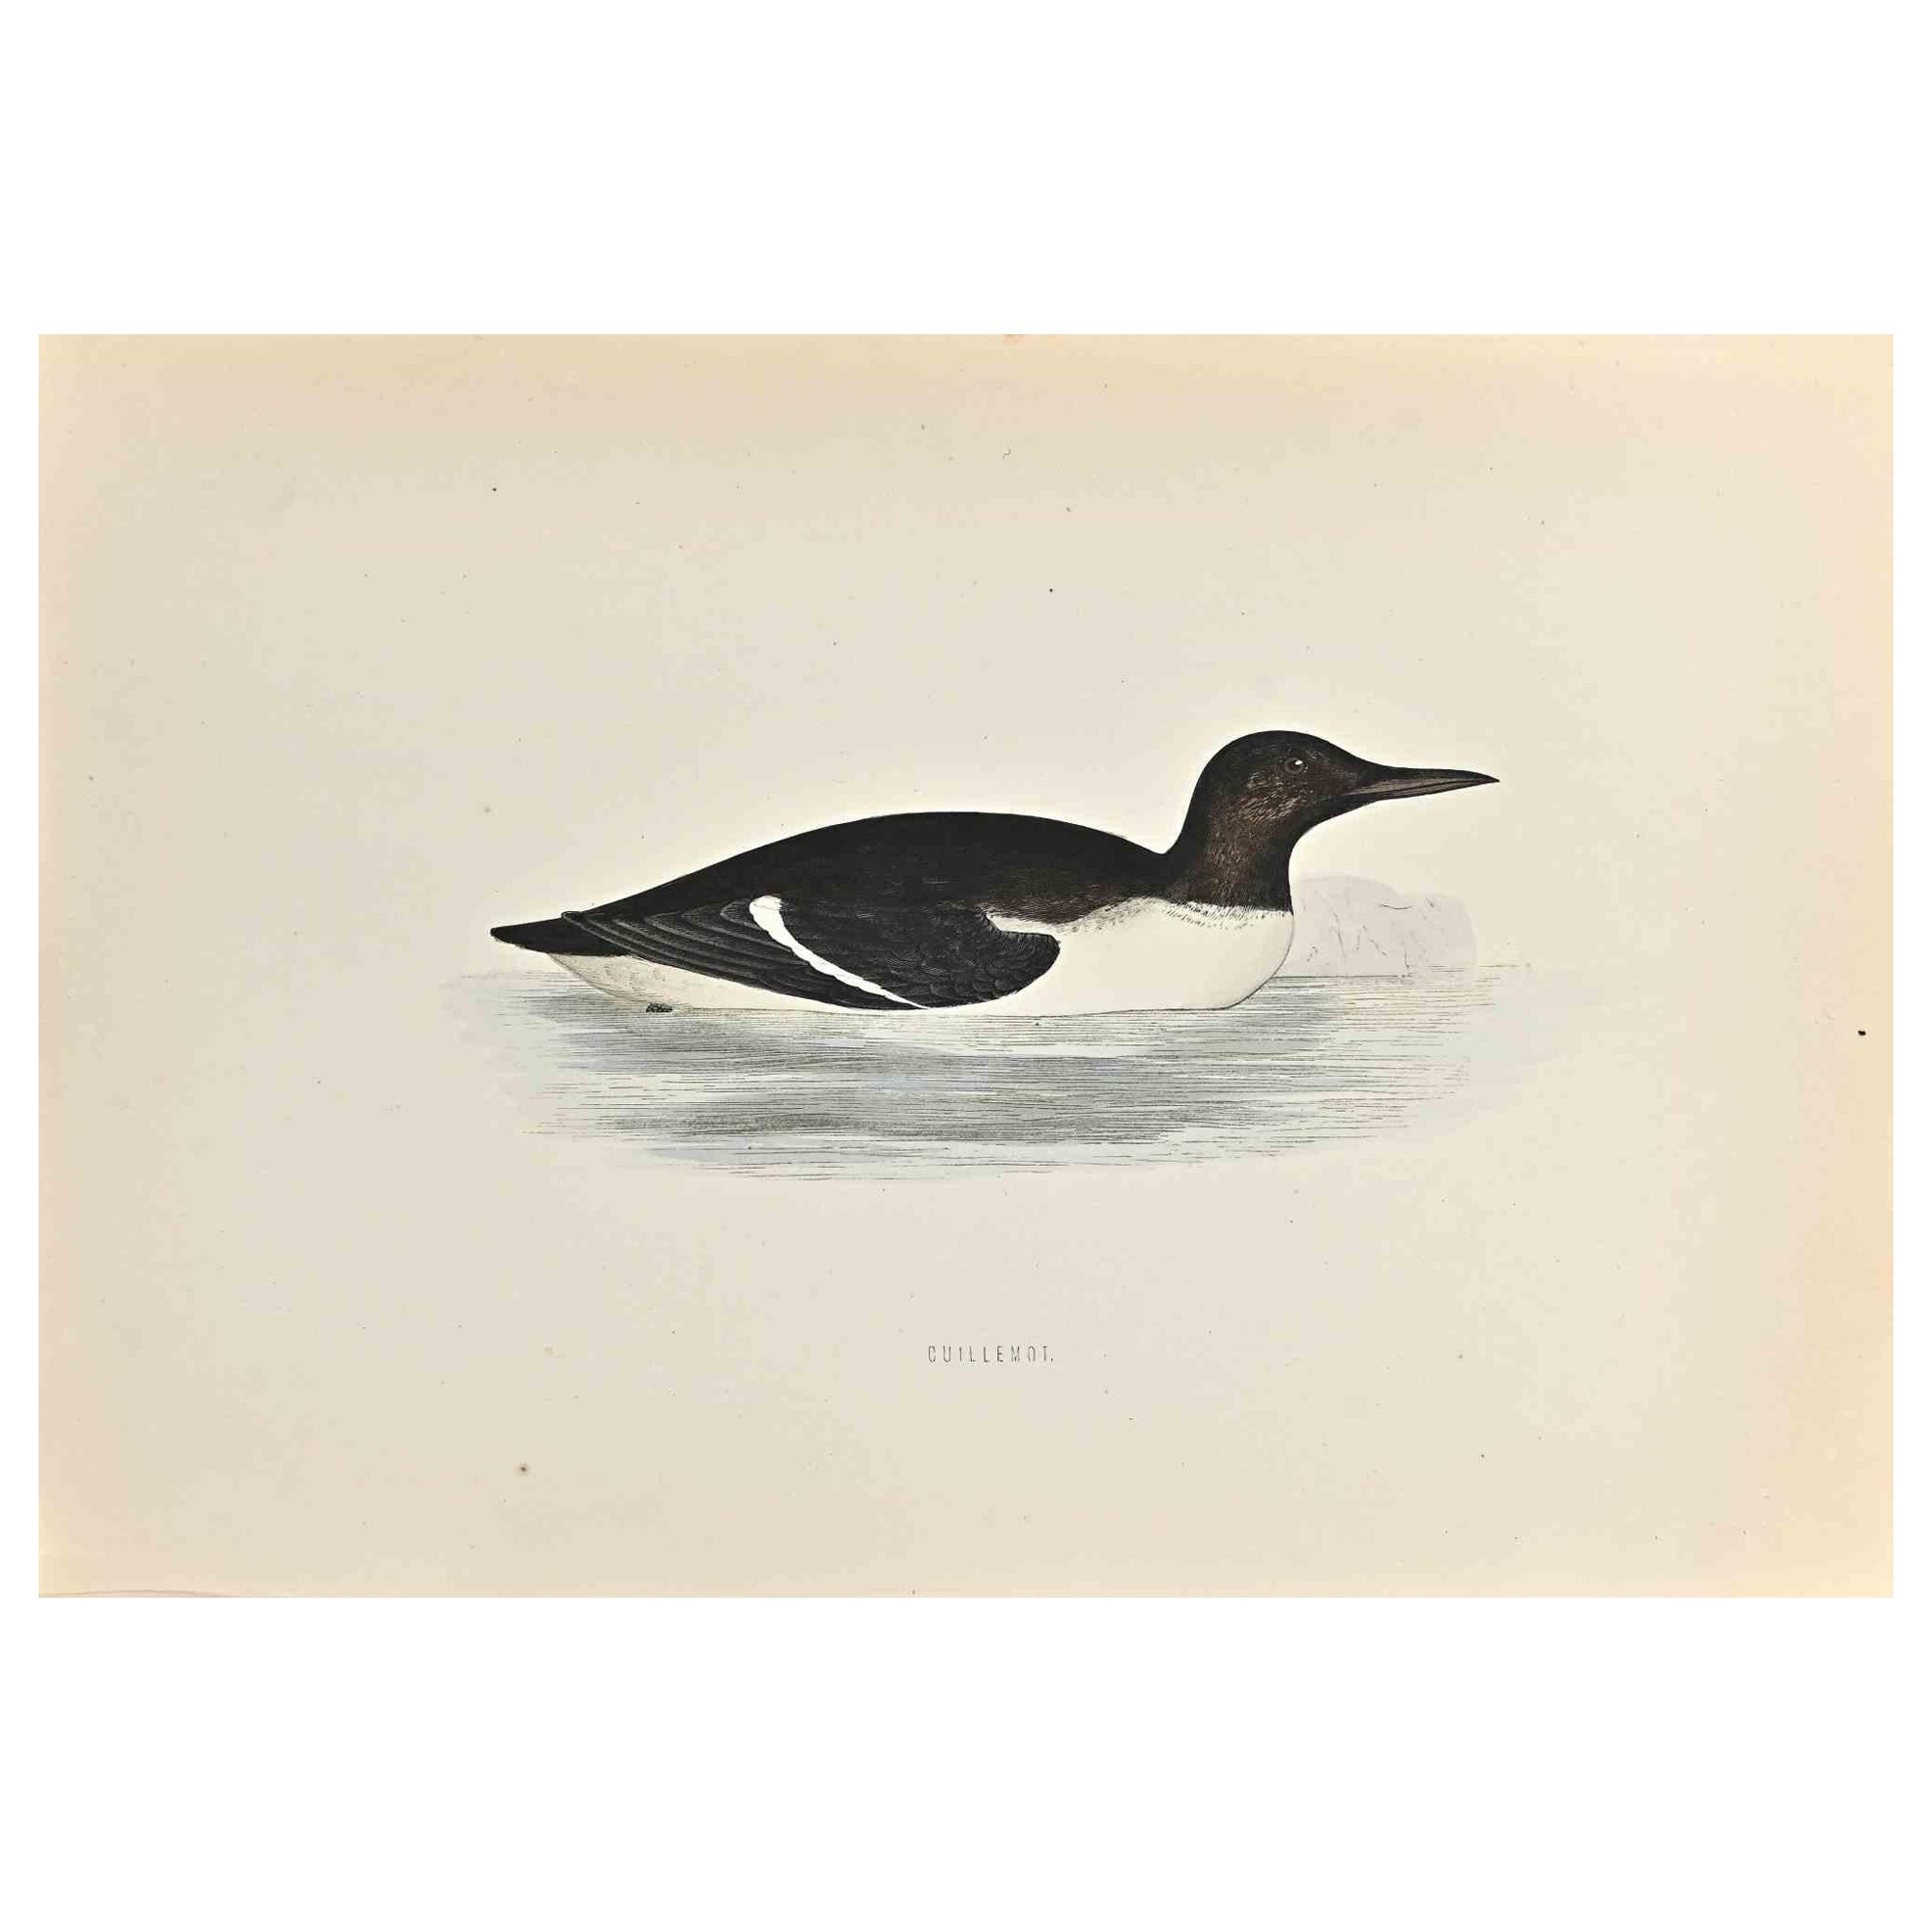 Guillemot is a modern artwork realized in 1870 by the British artist Alexander Francis Lydon (1836-1917) . 

Woodcut print, hand colored, published by London, Bell & Sons, 1870.  Name of the bird printed in plate. This work is part of a print suite